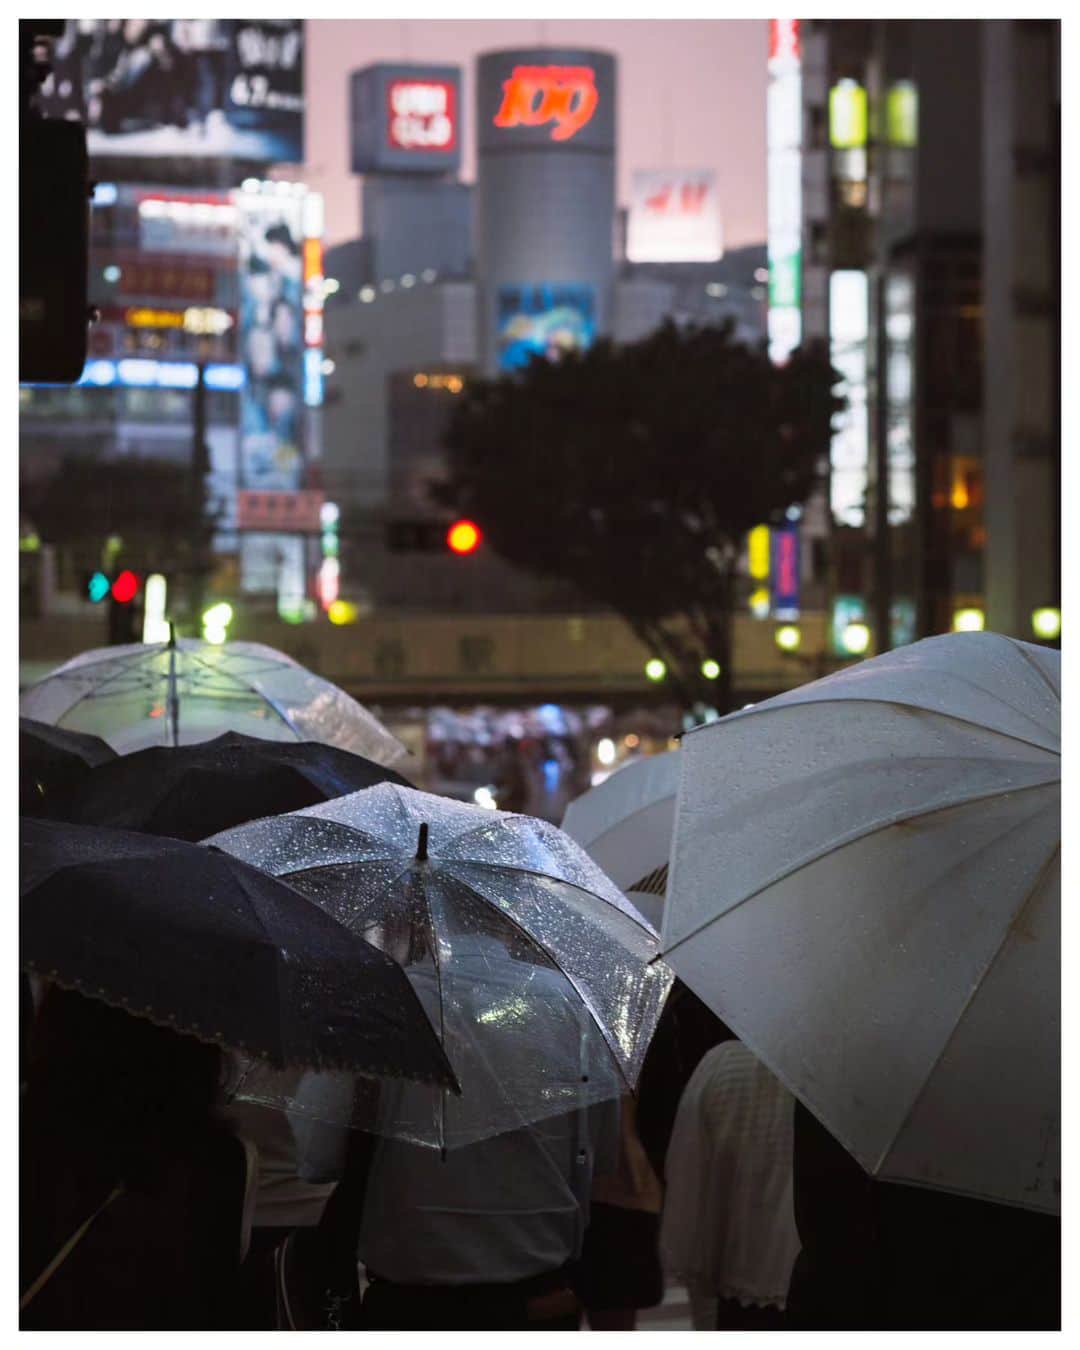 Takashi Yasuiのインスタグラム：「Tokyo ☔ June 2017  📕My photo book - worldwide shipping daily - 🖥 Lightroom presets ▶▶Link in bio  #USETSU #USETSUpresets #TakashiYasui #SPiCollective #filmic_streets #ASPfeatures #photocinematica #STREETGRAMMERS #street_storytelling #bcncollective #ifyouleave #sublimestreet #streetfinder #timeless_streets #MadeWithLightroom #worldviewmag #hellofrom #reco_ig」